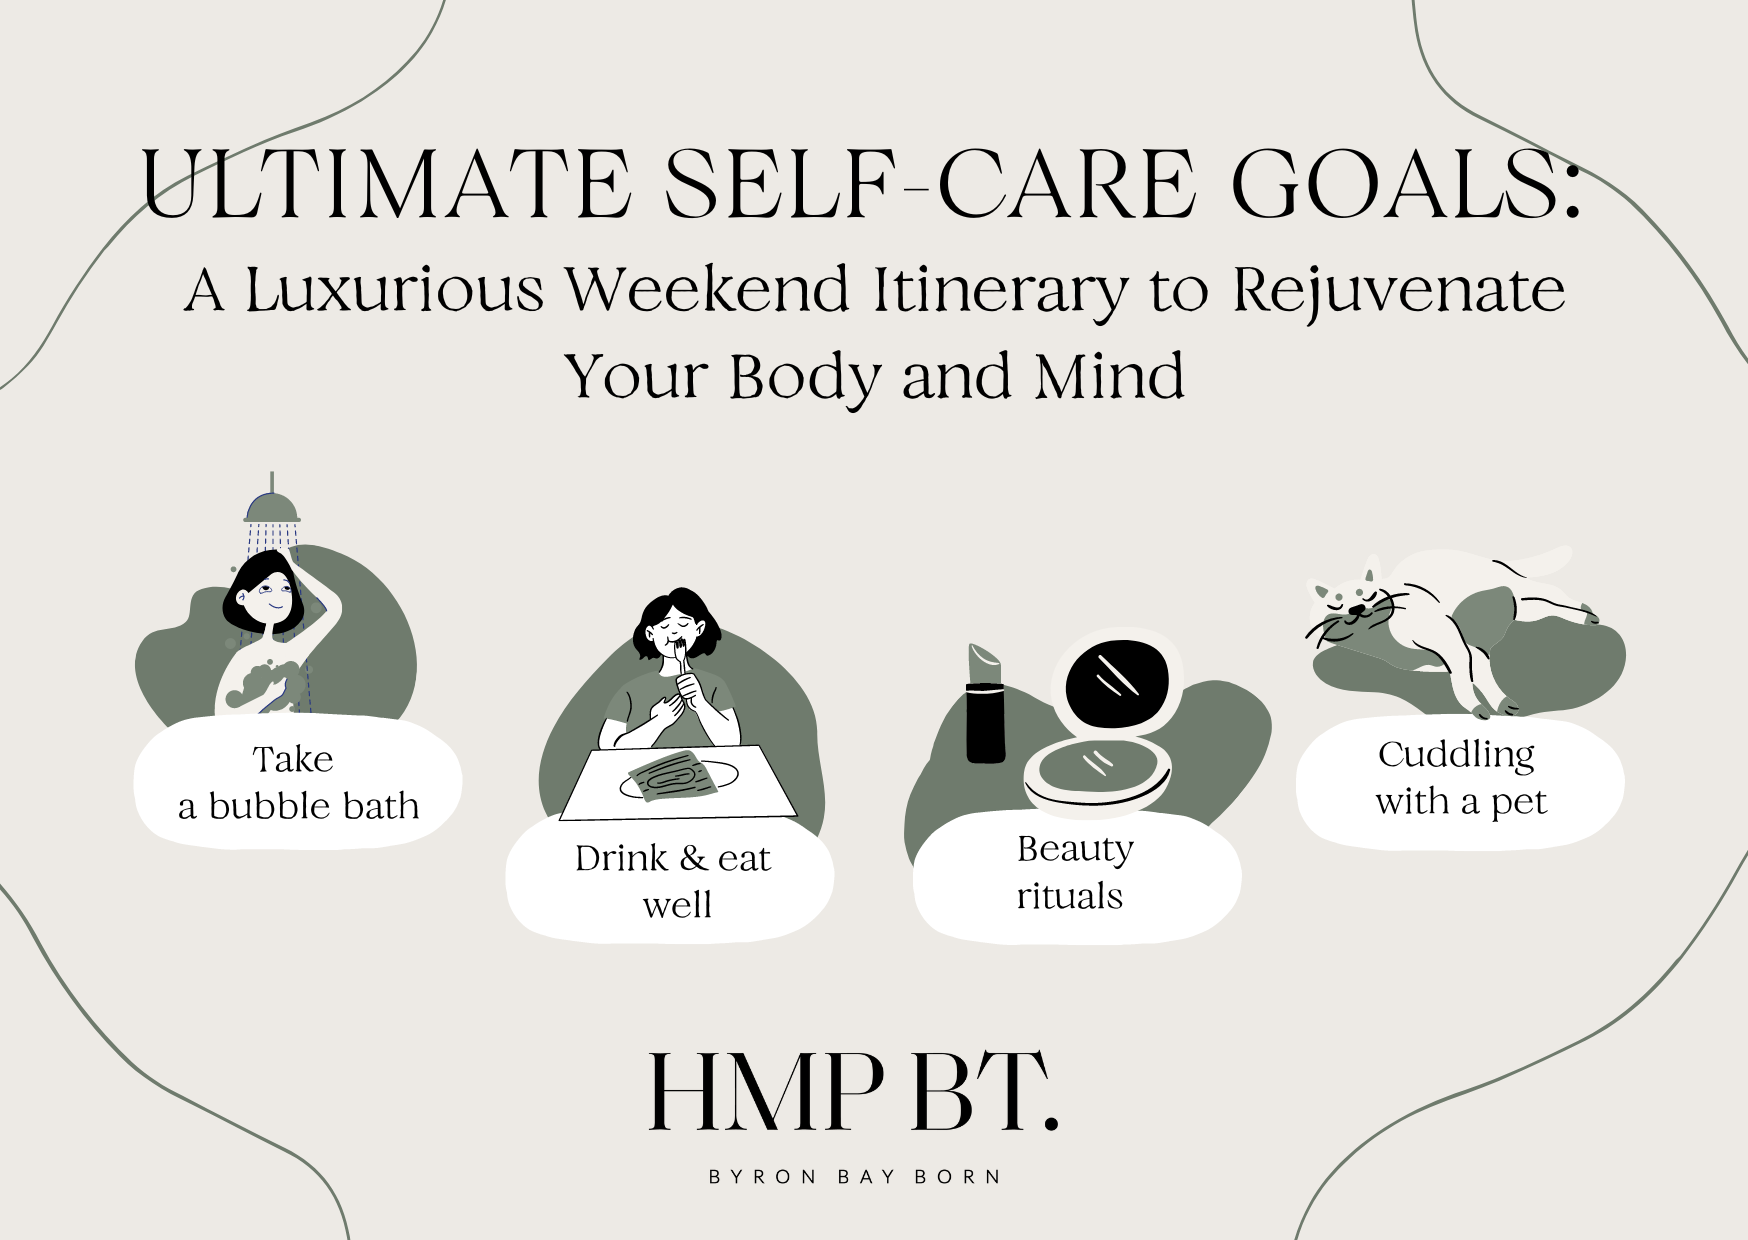 "Ultimate Self-Care Goals: A Luxurious Weekend Itinerary to Rejuvenate Your Body and Mind"